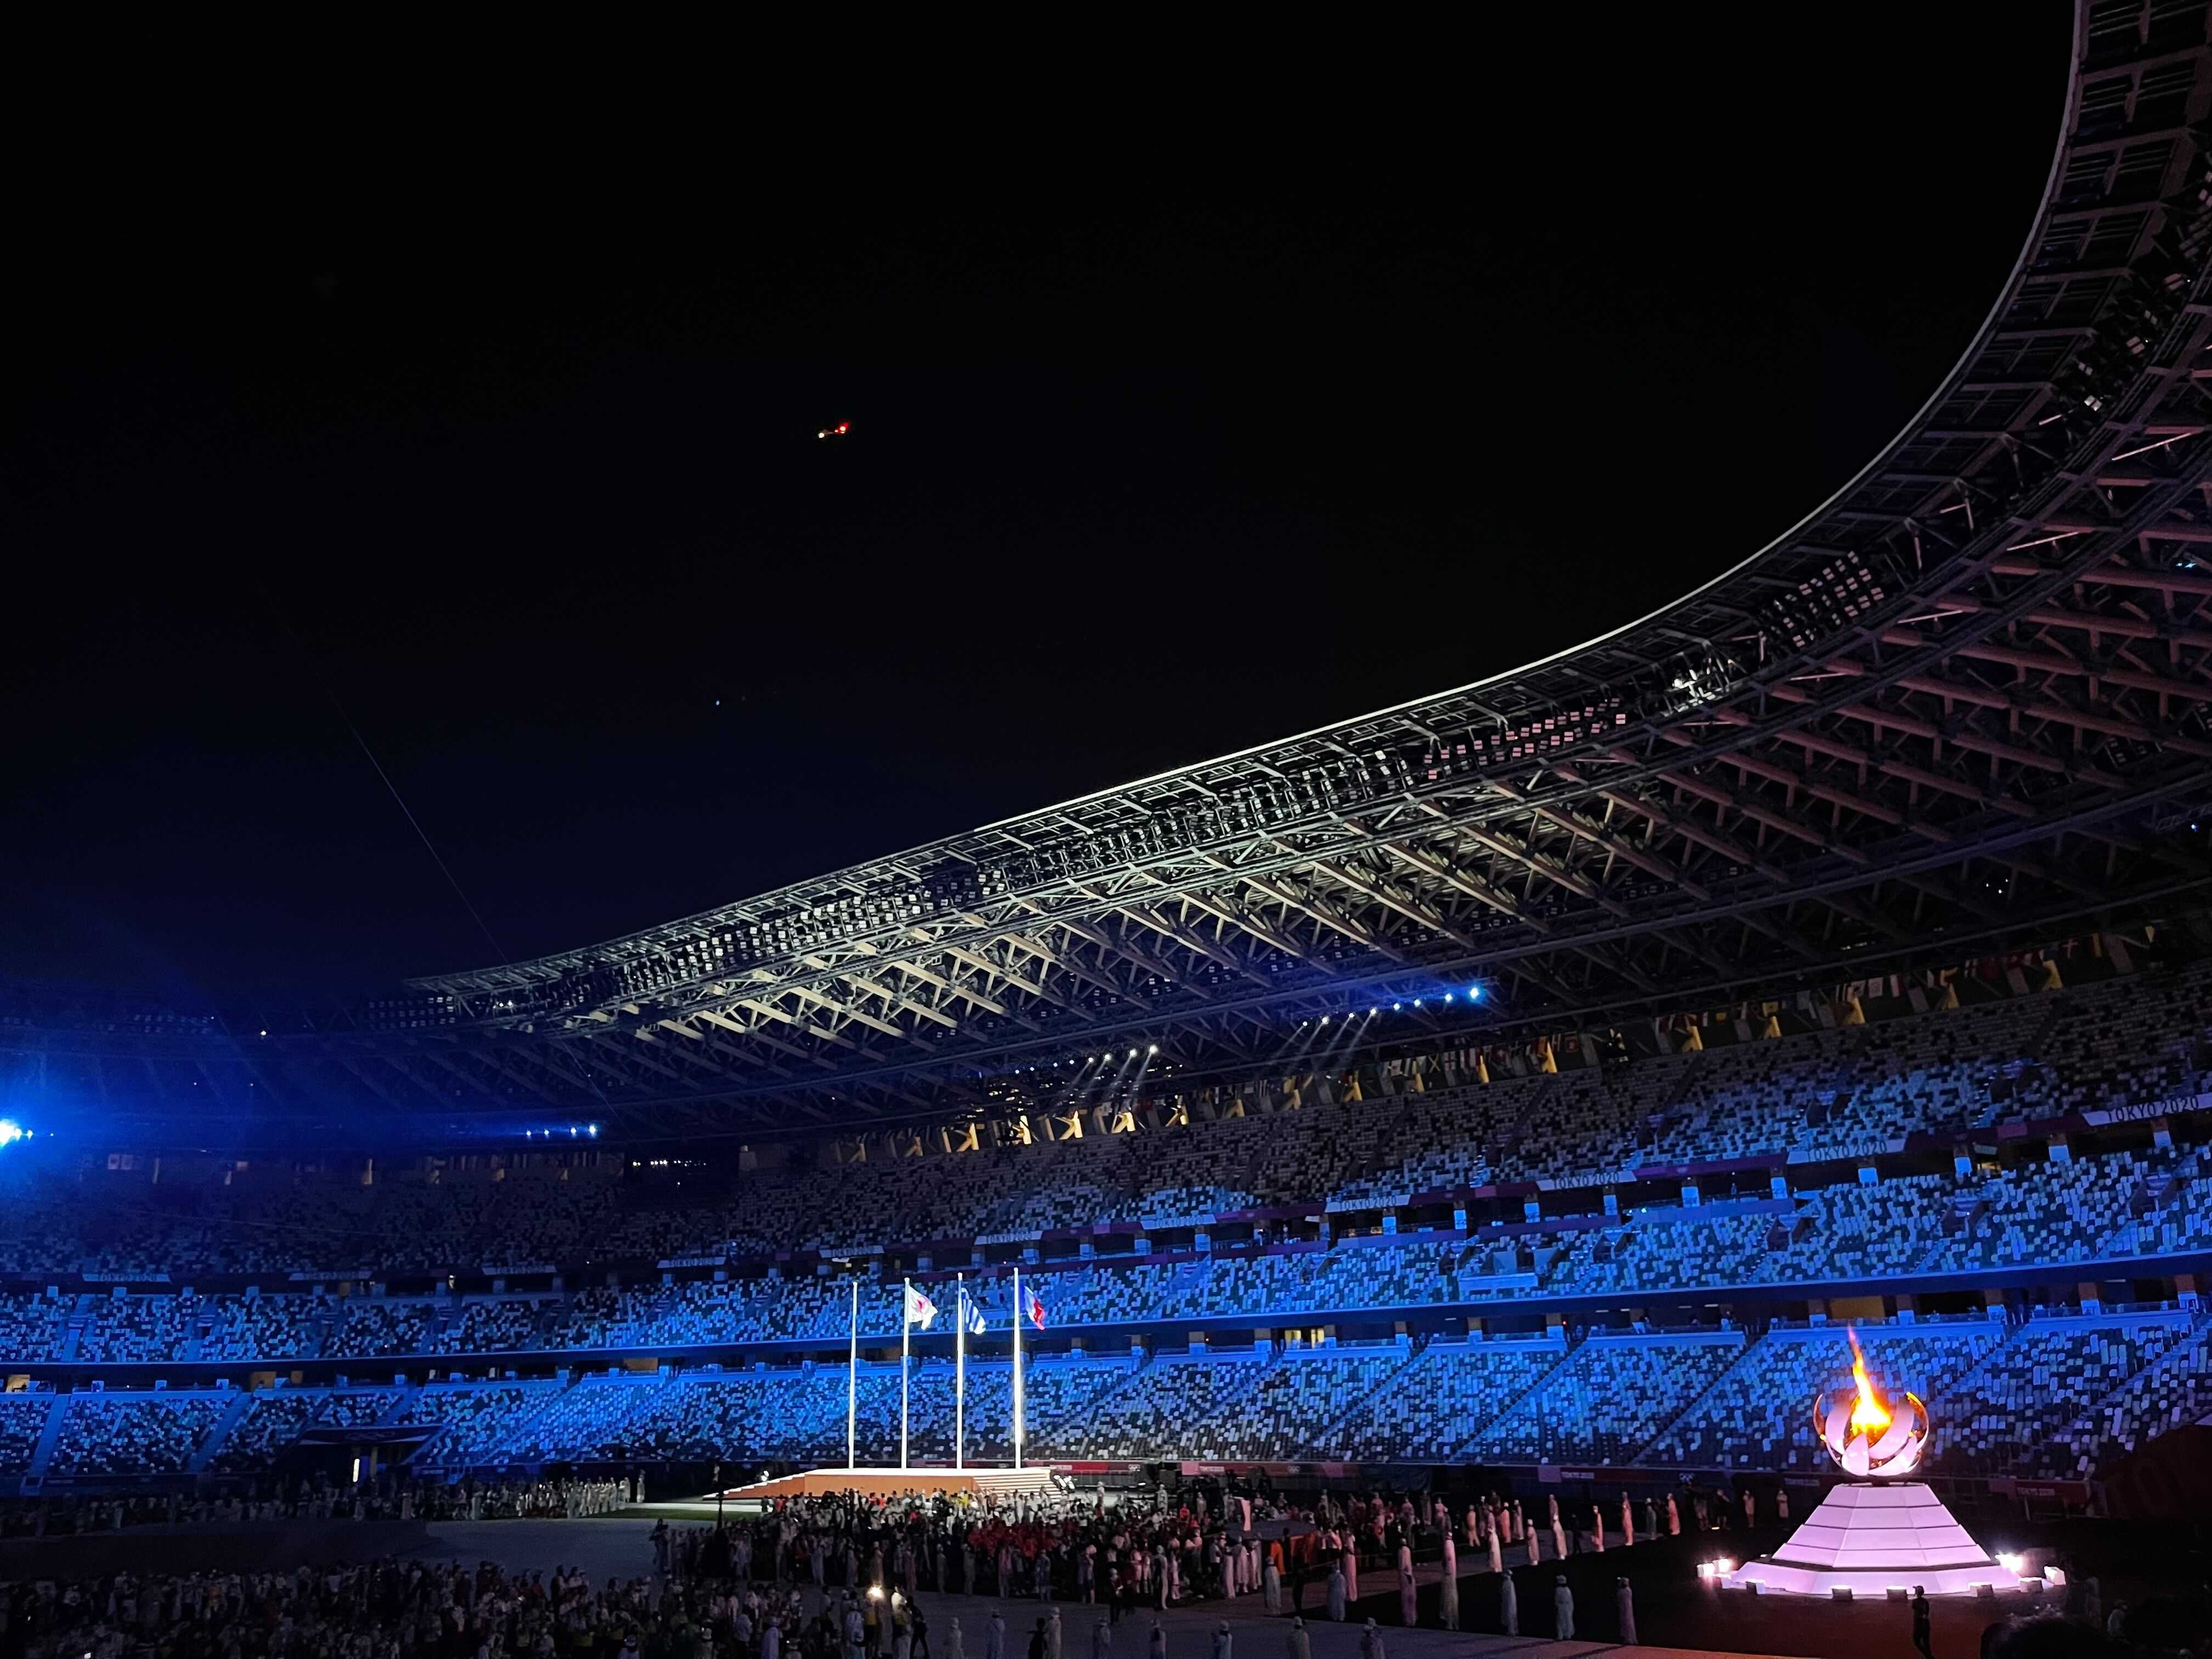 The olympic stadium during the closing ceremony.